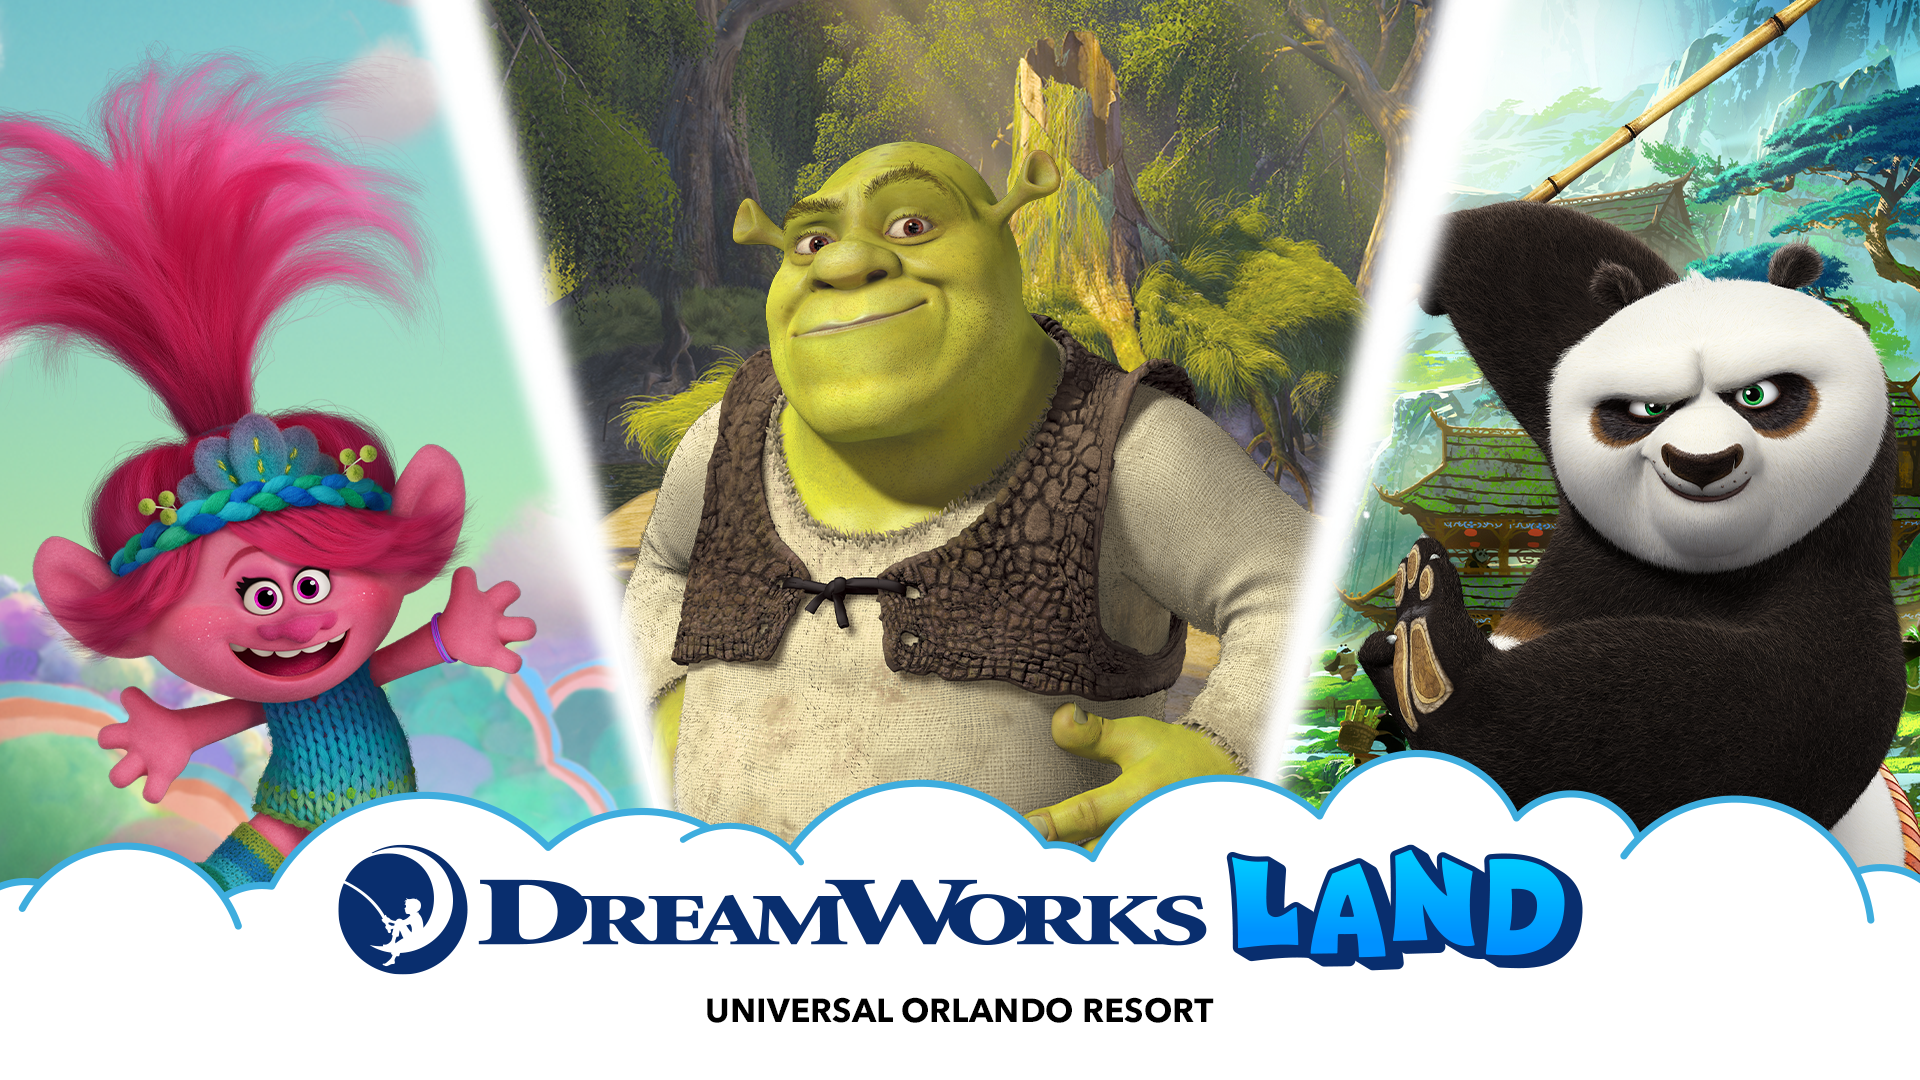 DreamWorks Land at Universal Orlando: What Does it Have to Offer?